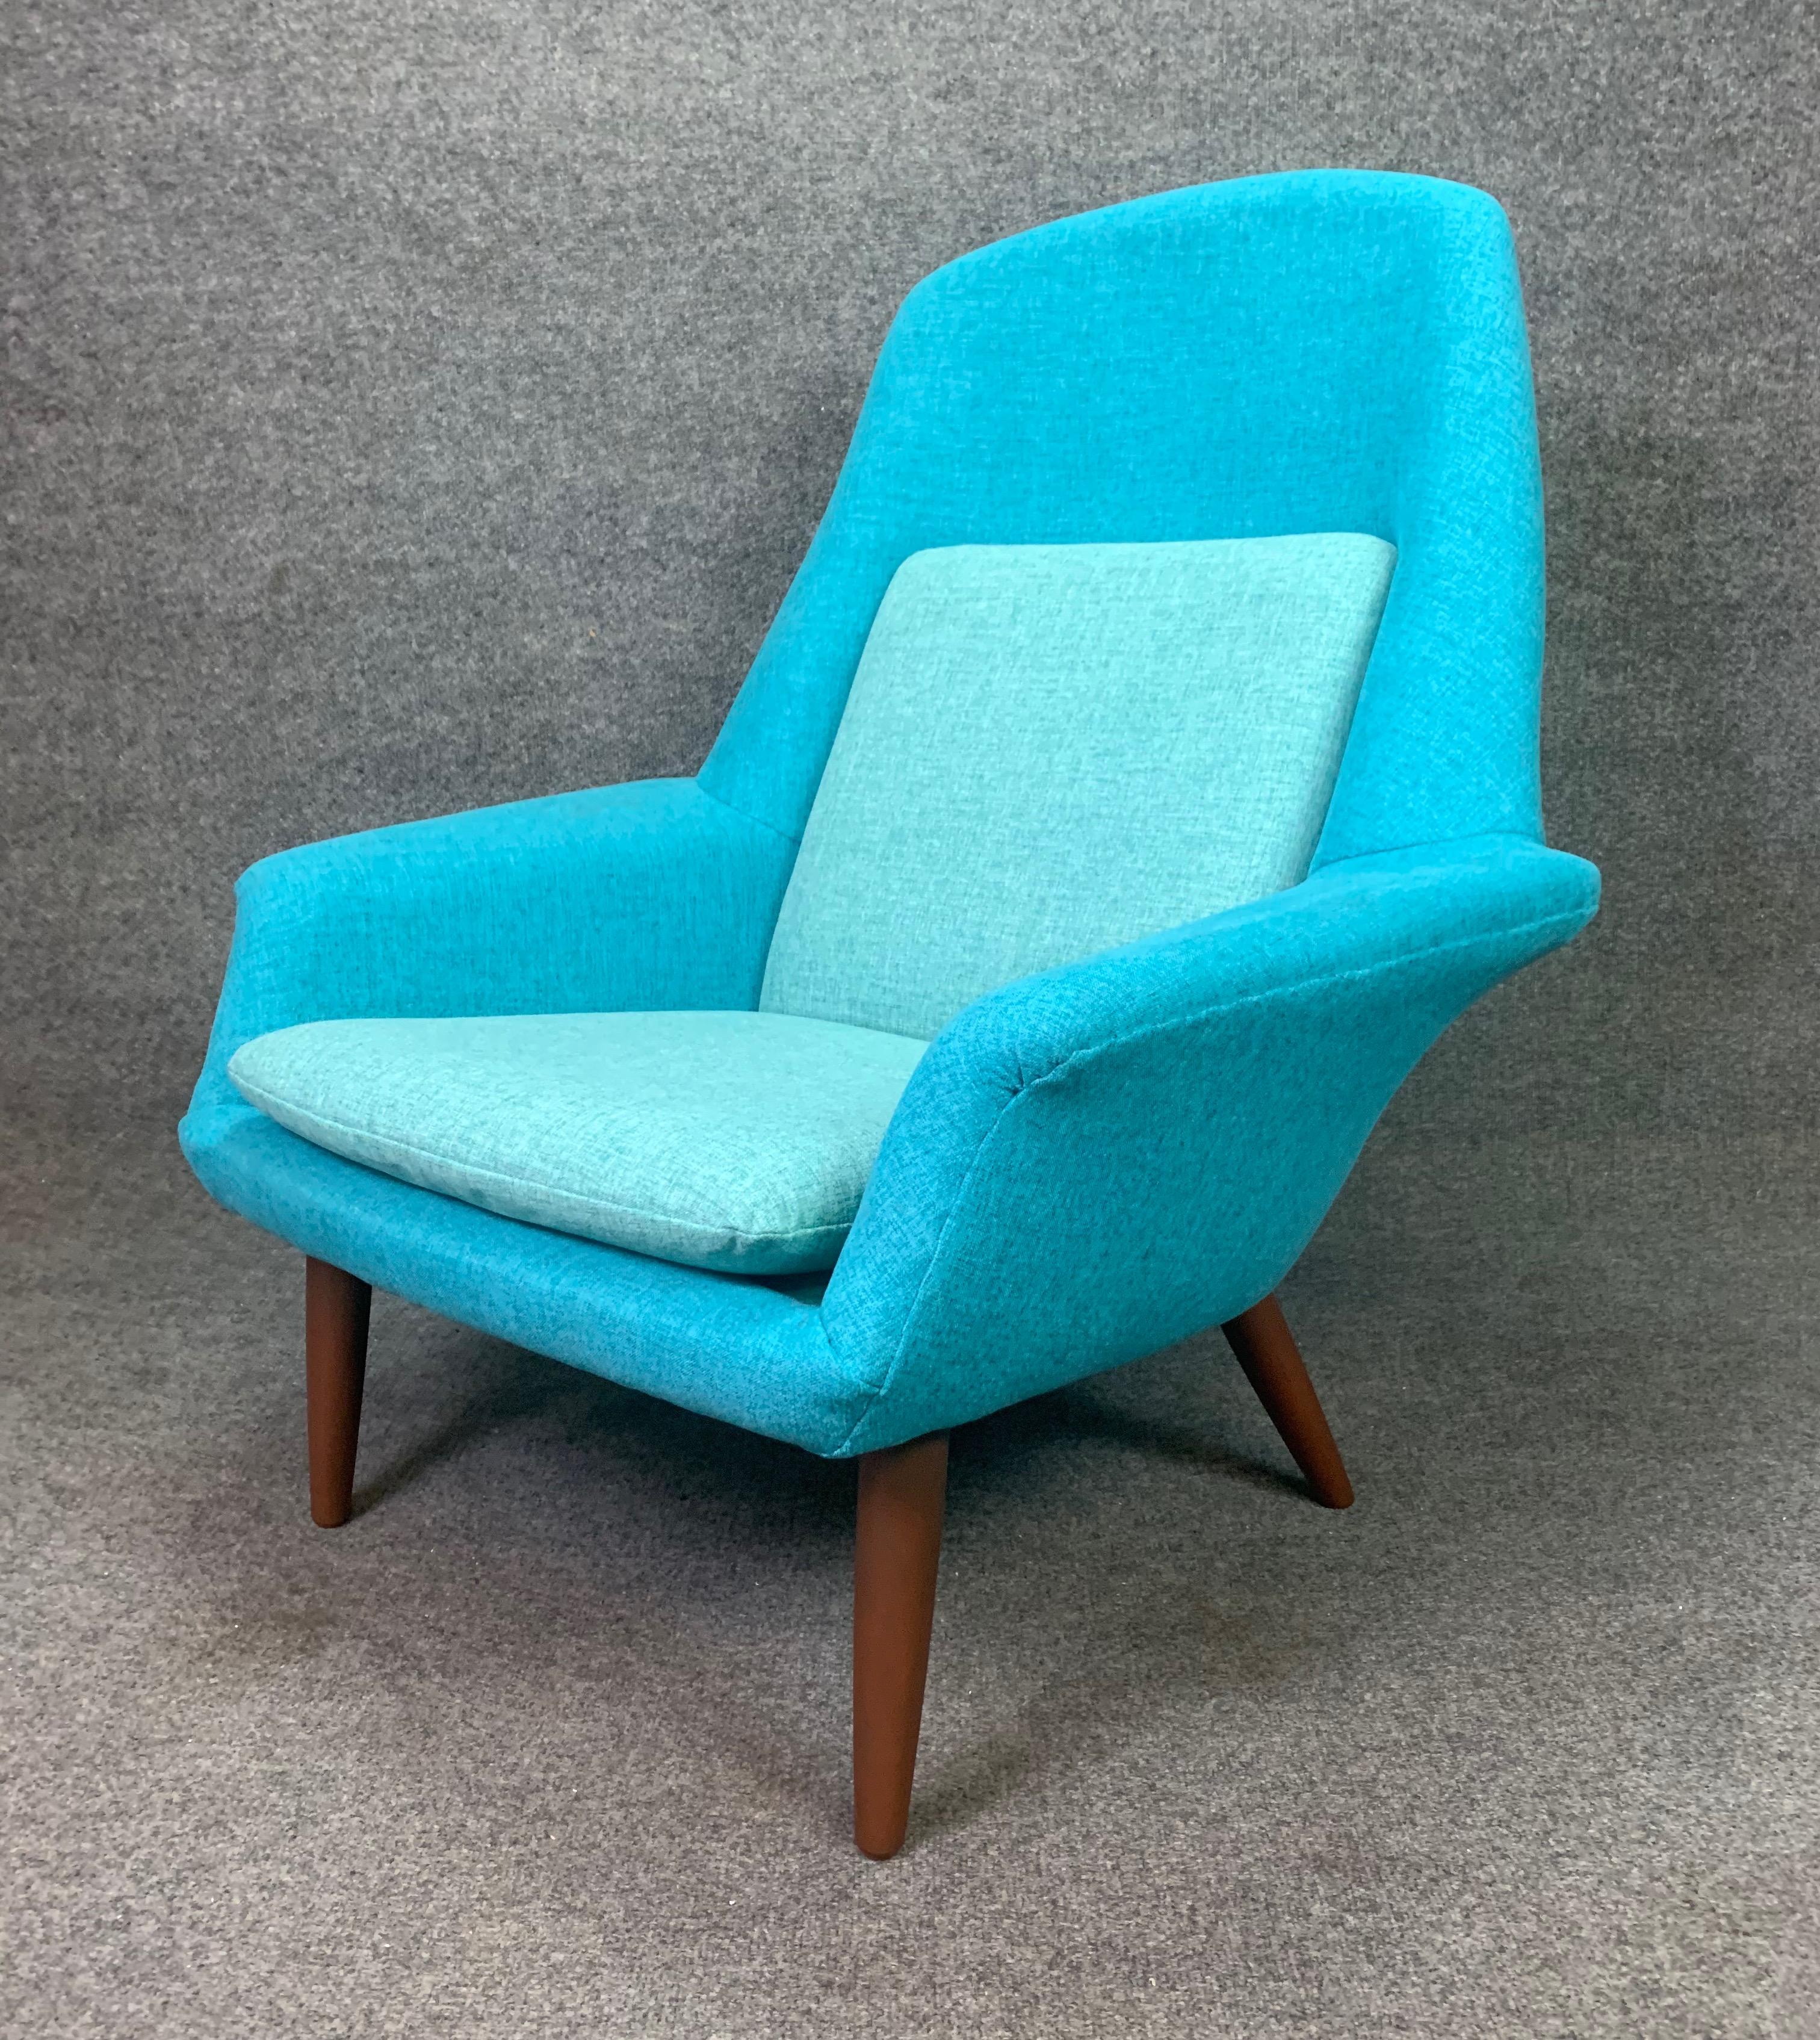 Here is a sculptural Scandinavian Modern easy chair manufactured in the 1960s by Broderna Anderssons in Sweden in the 1960s.
This rare and comfortable chair, recently imported from Helsingborg to California, received a complete new foam and period